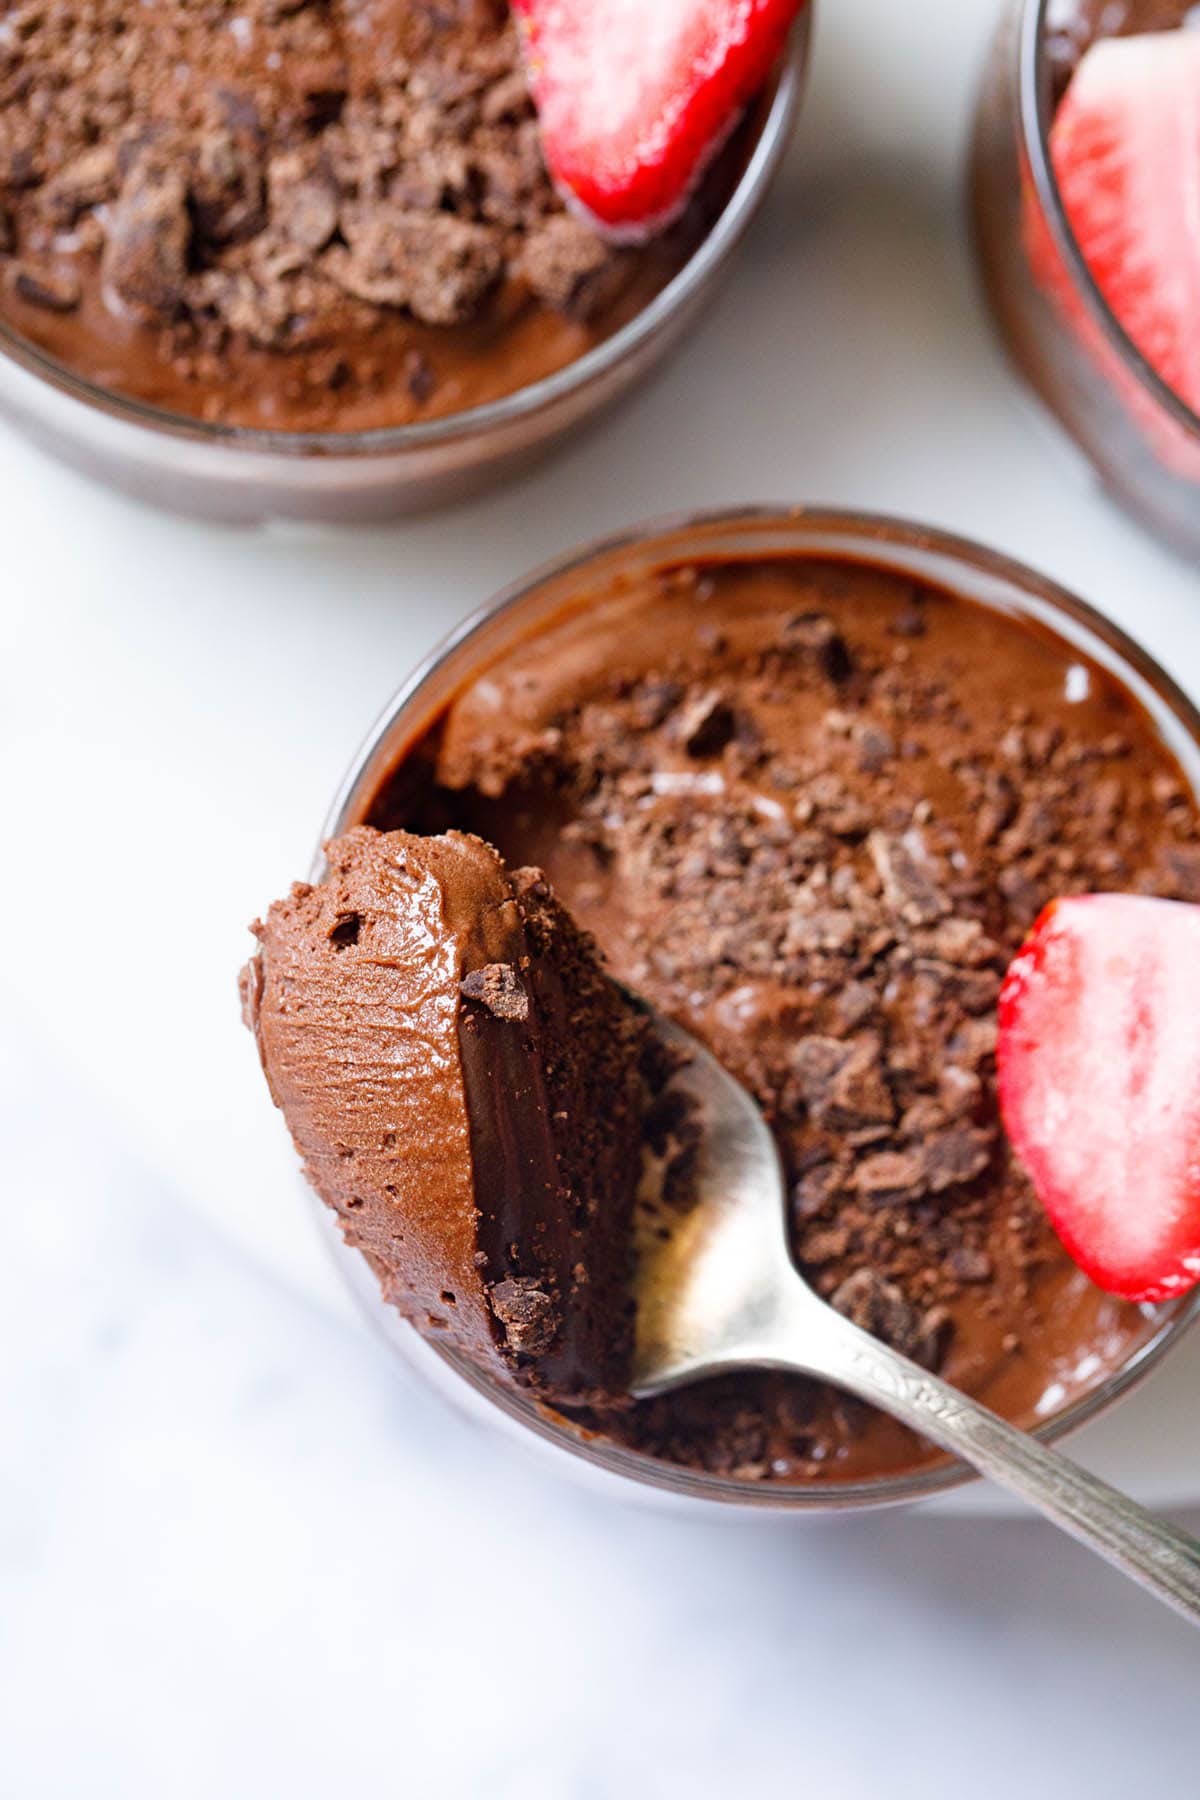 chocolate mousse scooped in a silver spoon showing its light fluffy texture placed on side of bowl filled with the mousse